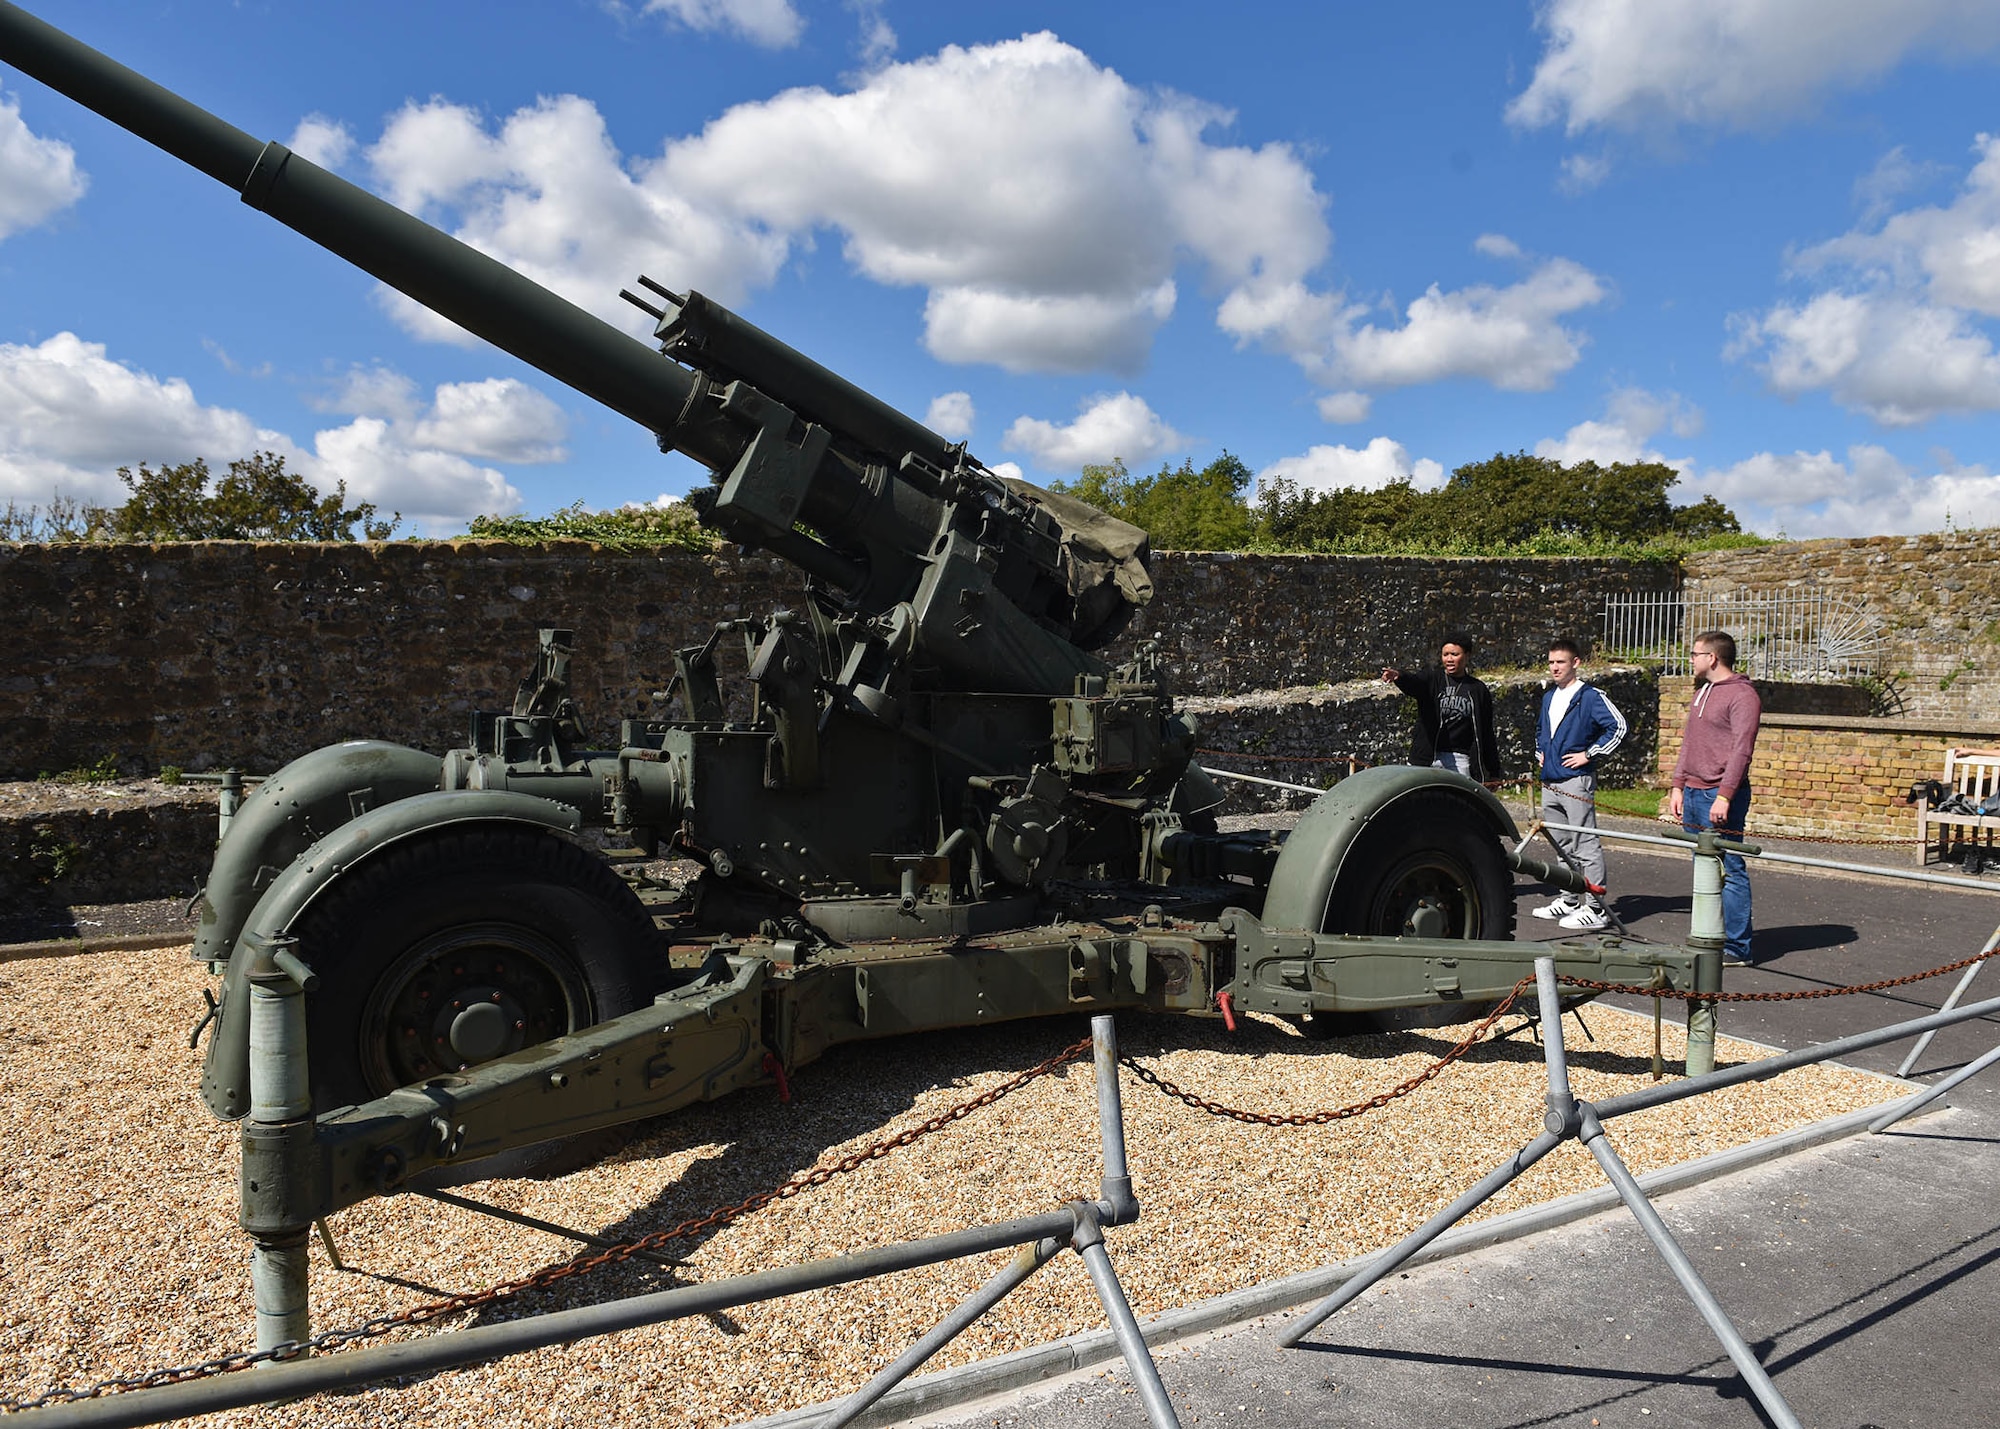 Team Mildenhall Airmen observe a World War I fire command post during a resiliency trip to Dover Castle in Dover, England, Sept.  7, 2018. The trip included a self-guided tour of the castle along with an underground hospital, and a realistic representation of Operation Dynamo. Operation Dynamo was the rescue and evacuation of 338,000 Allied troops from Dunkirk in May 1940. (U.S. Air Force photo by Senior Airman Luke Milano